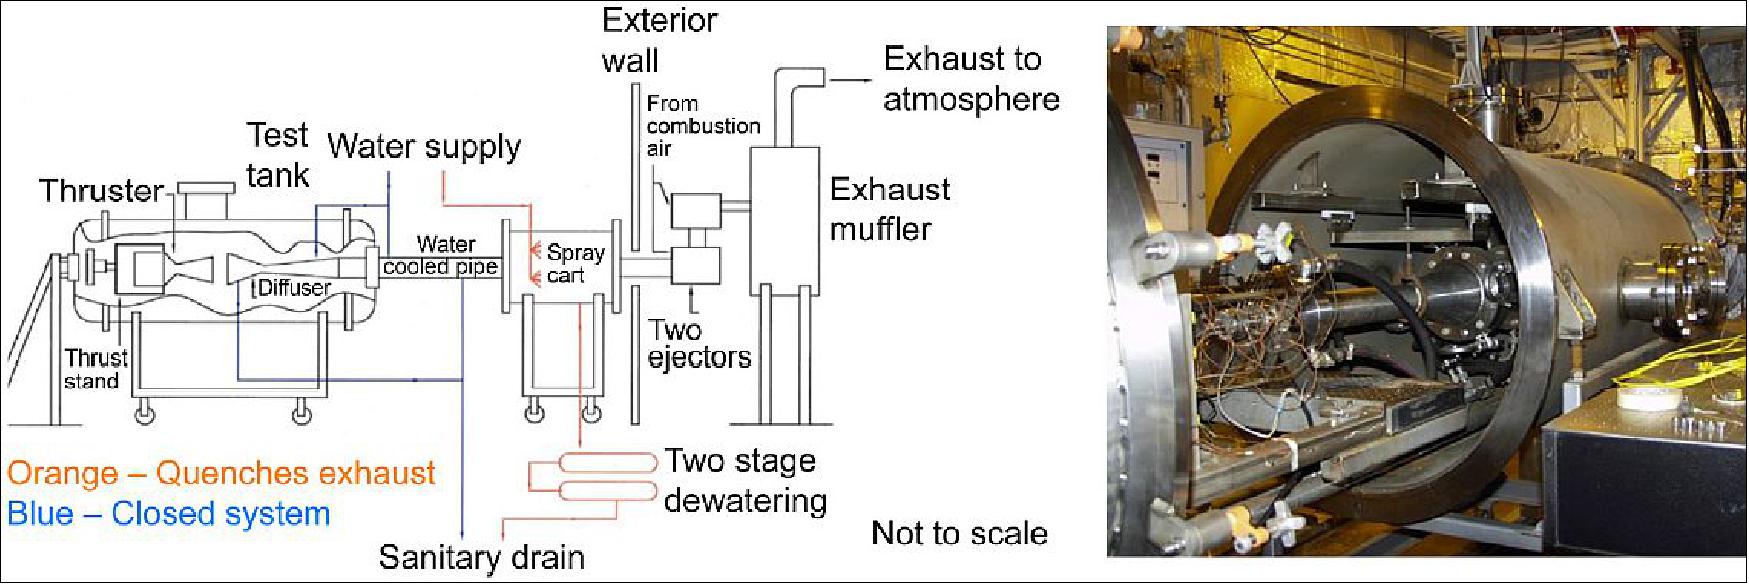 Figure 12: GRC RCL 11 schematic (left) and the vacuum chamber in the open position (right), image credit: NASA/GRC, BATC